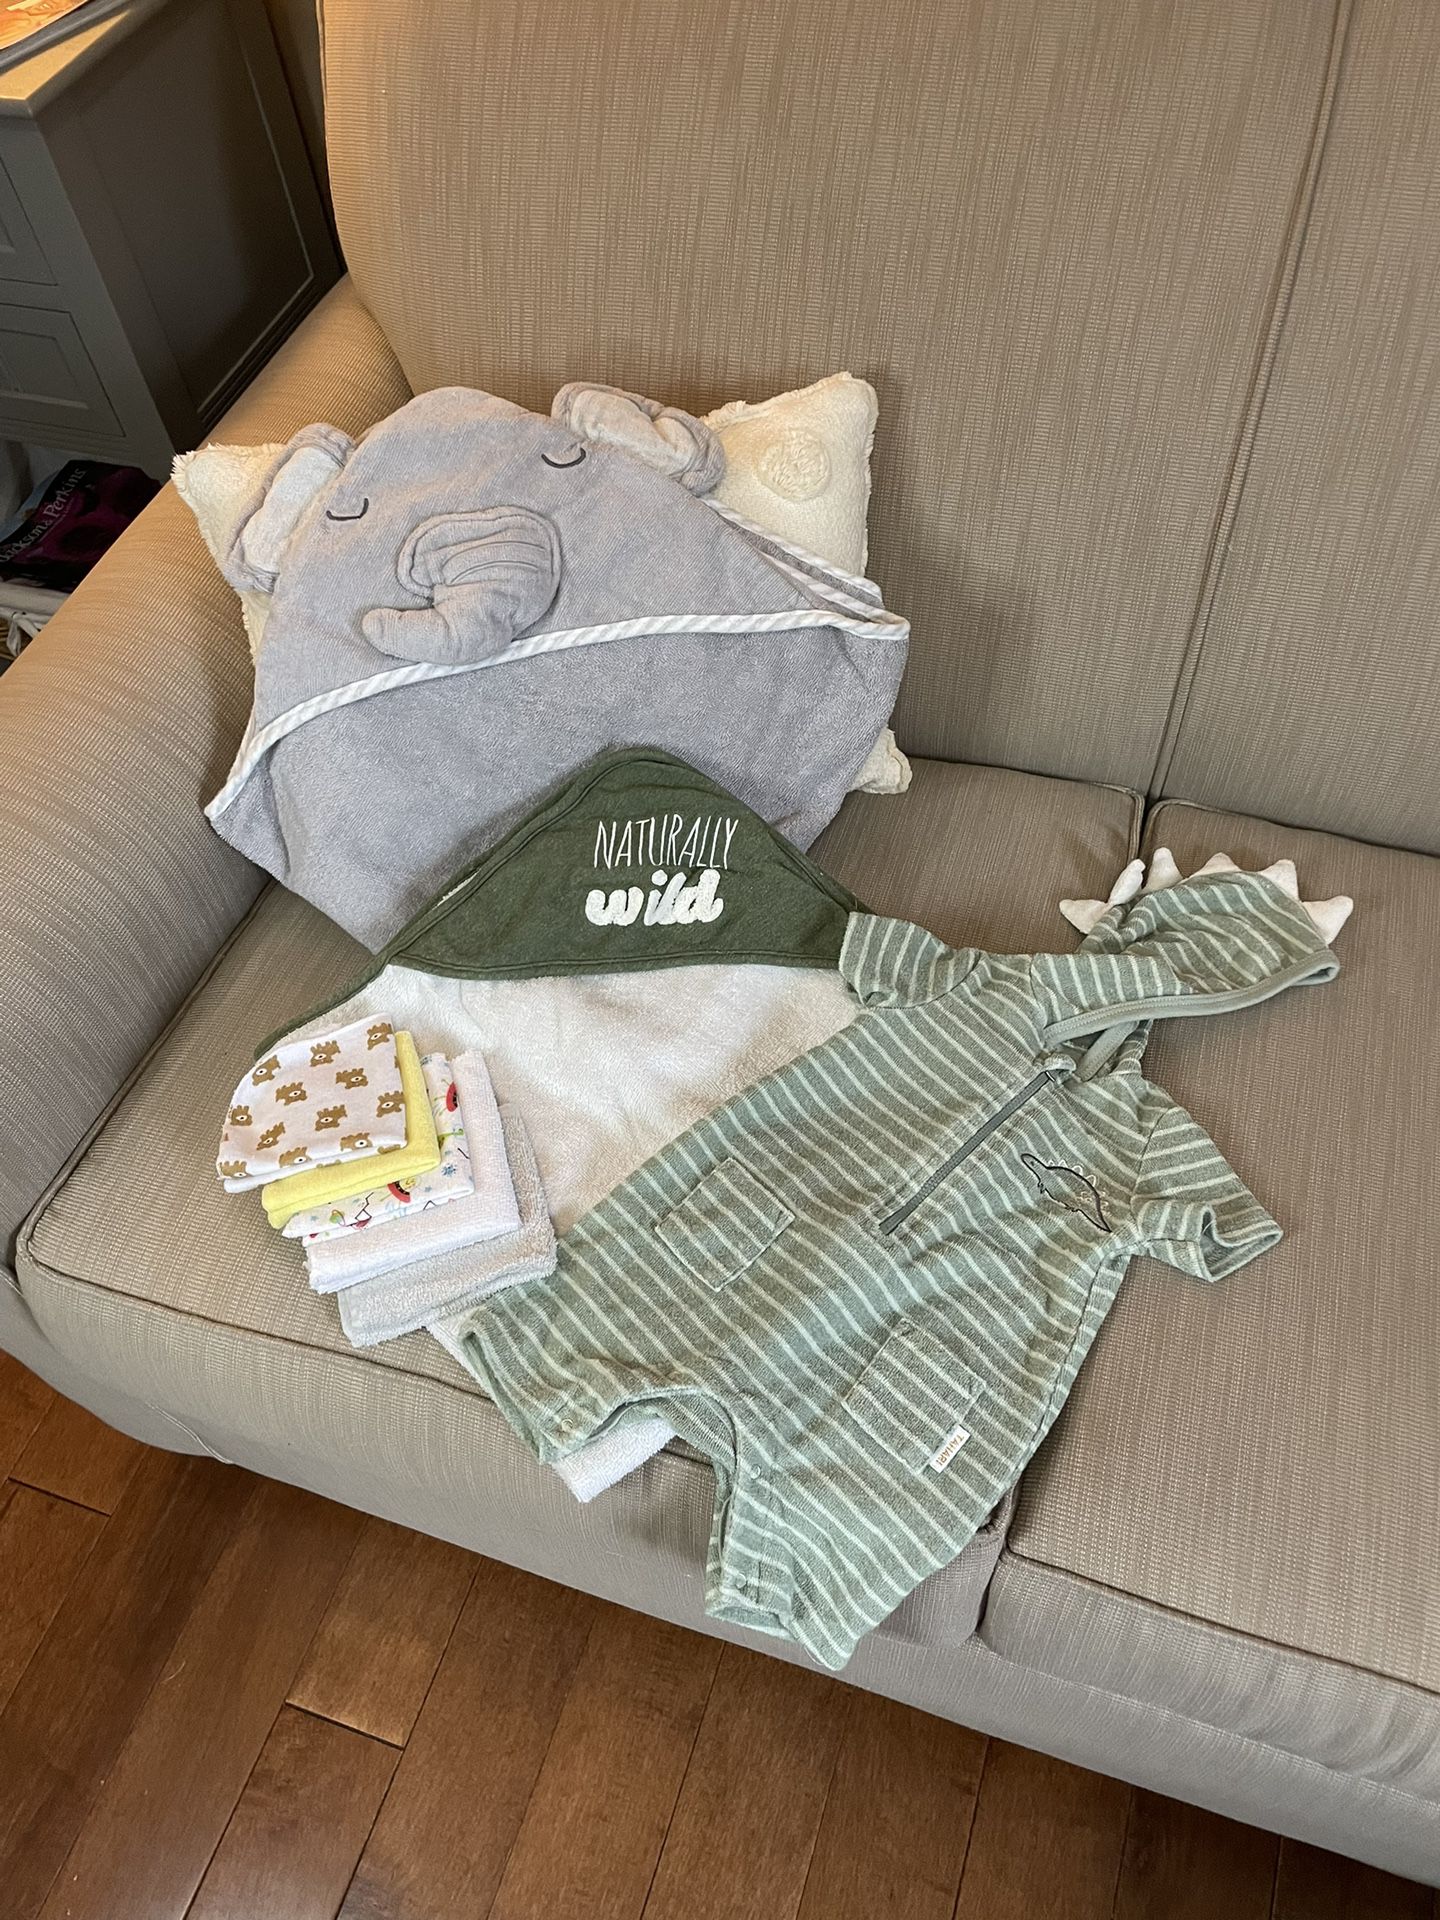 Baby items, towels, wash clothes, outfit